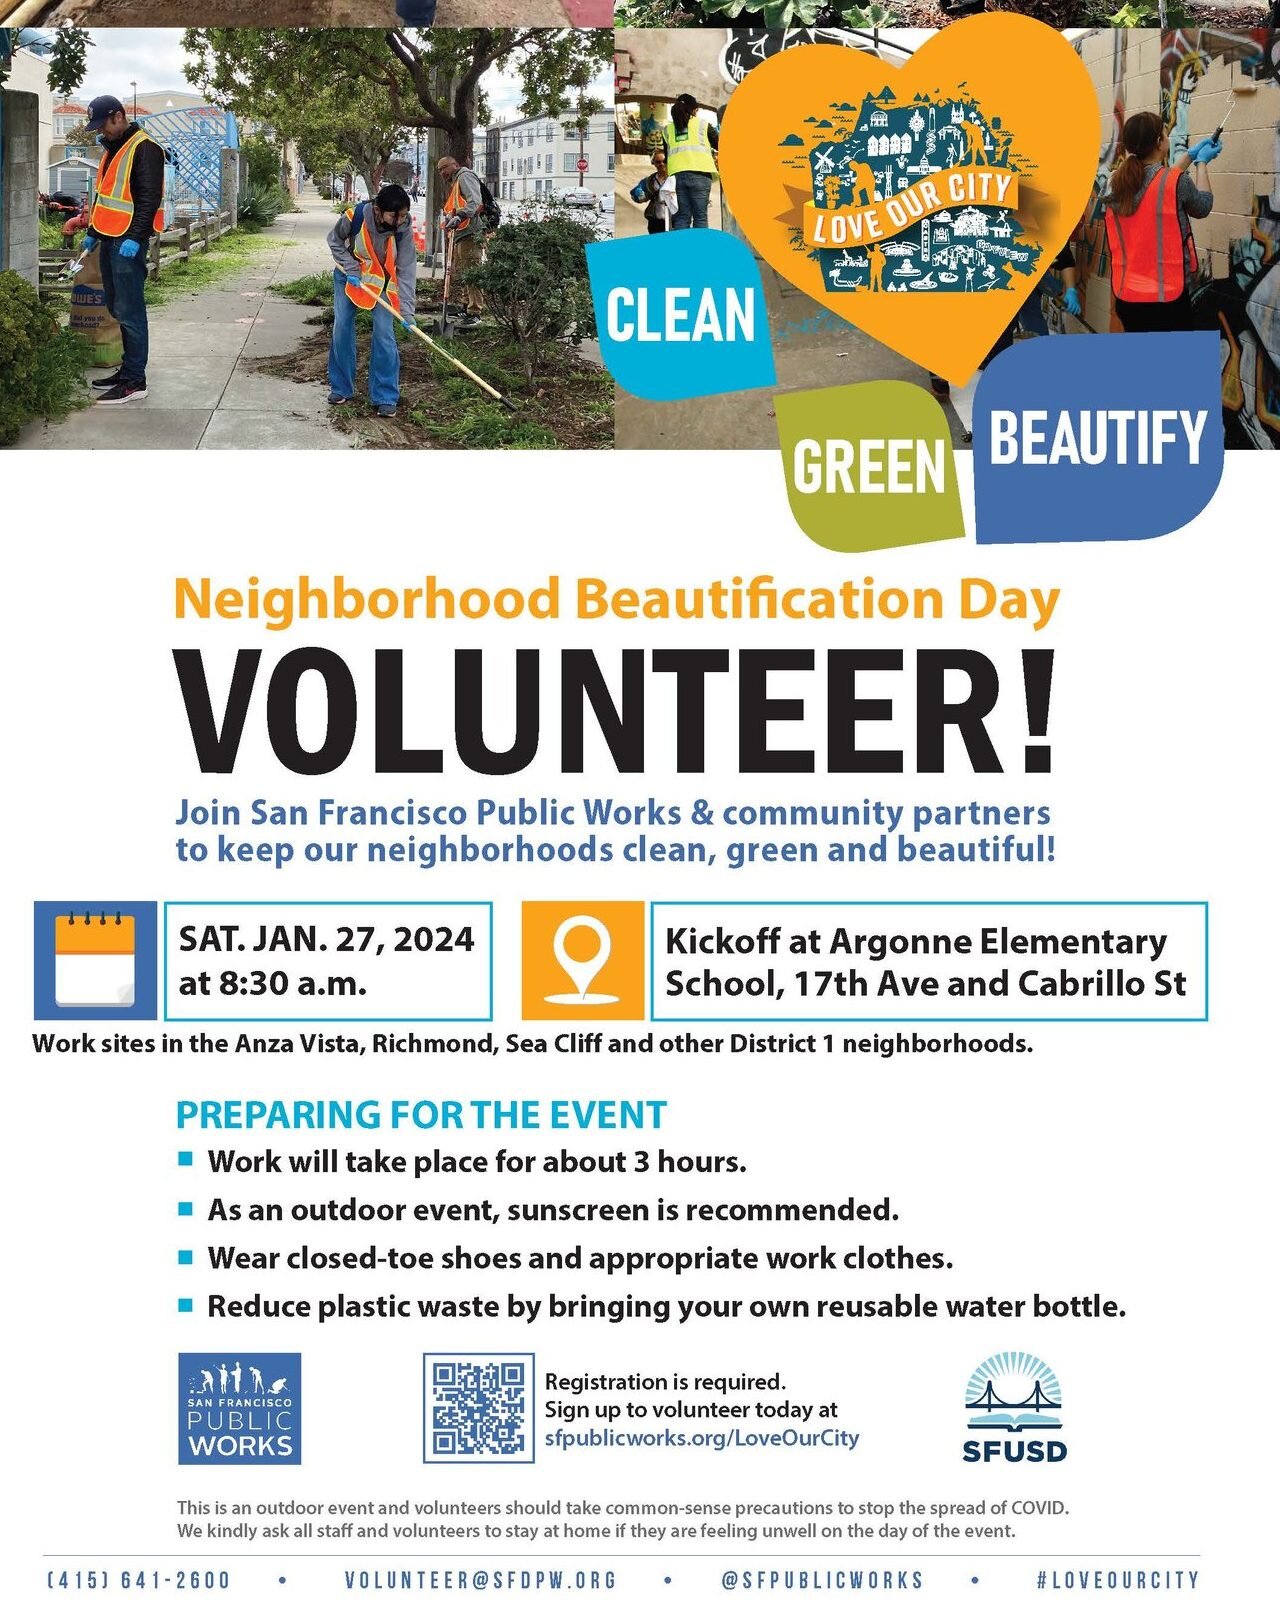 🧹 Love Our City! 
🧹January 27: District 1 &ndash; Argonne Elementary School

Volunteer at any of the neighborhood beautification days to keep San Francisco beautiful through landscaping and gardening projects, graffiti removal and litter cleanup in